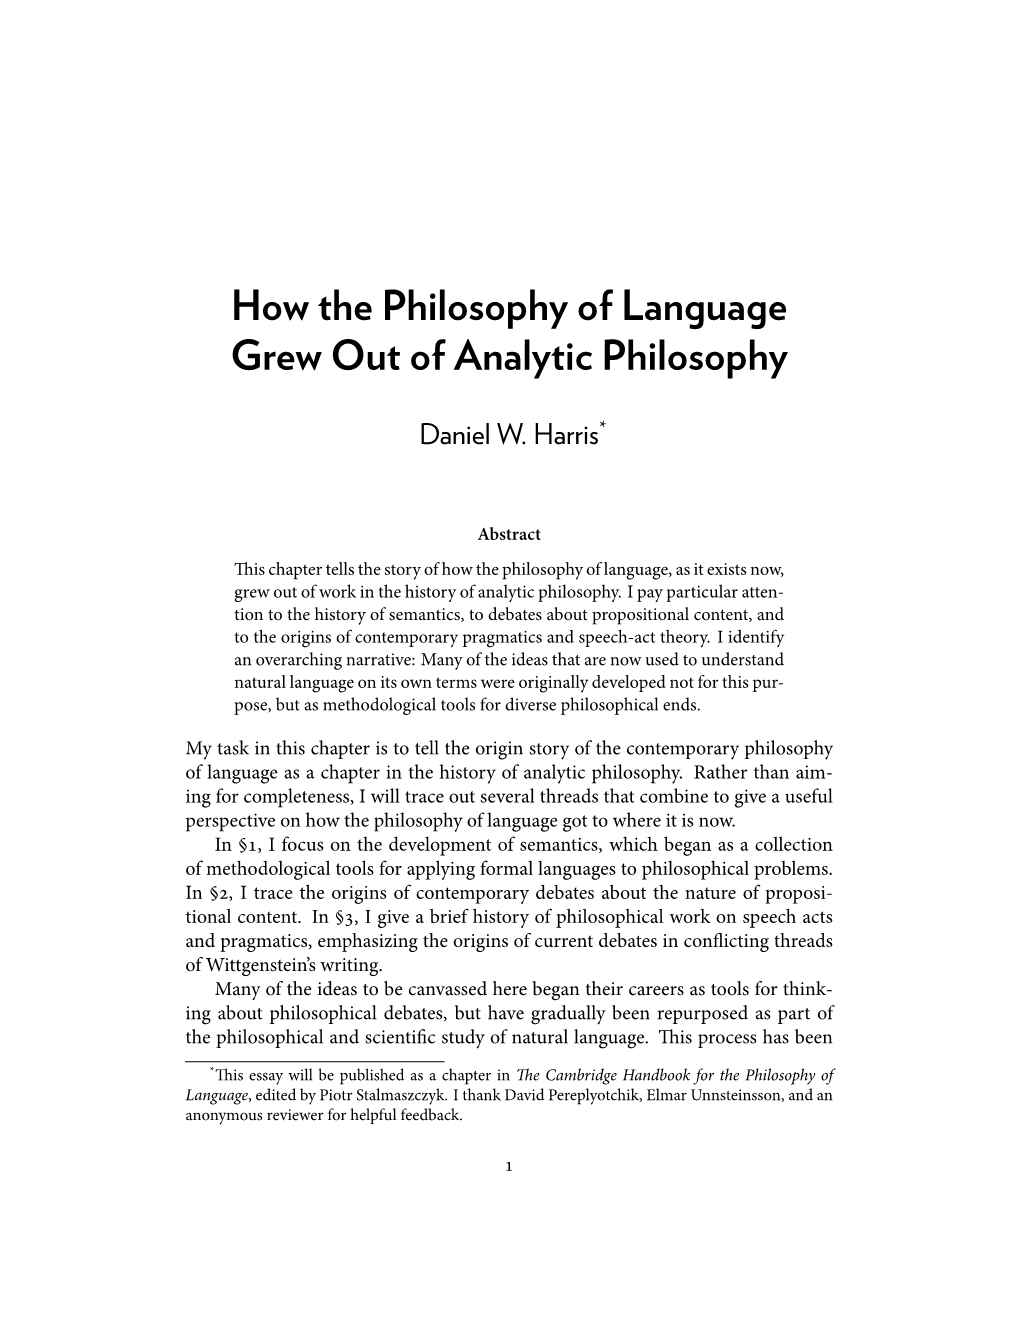 How the Philosophy of Language Grew out of Analytic Philosophy